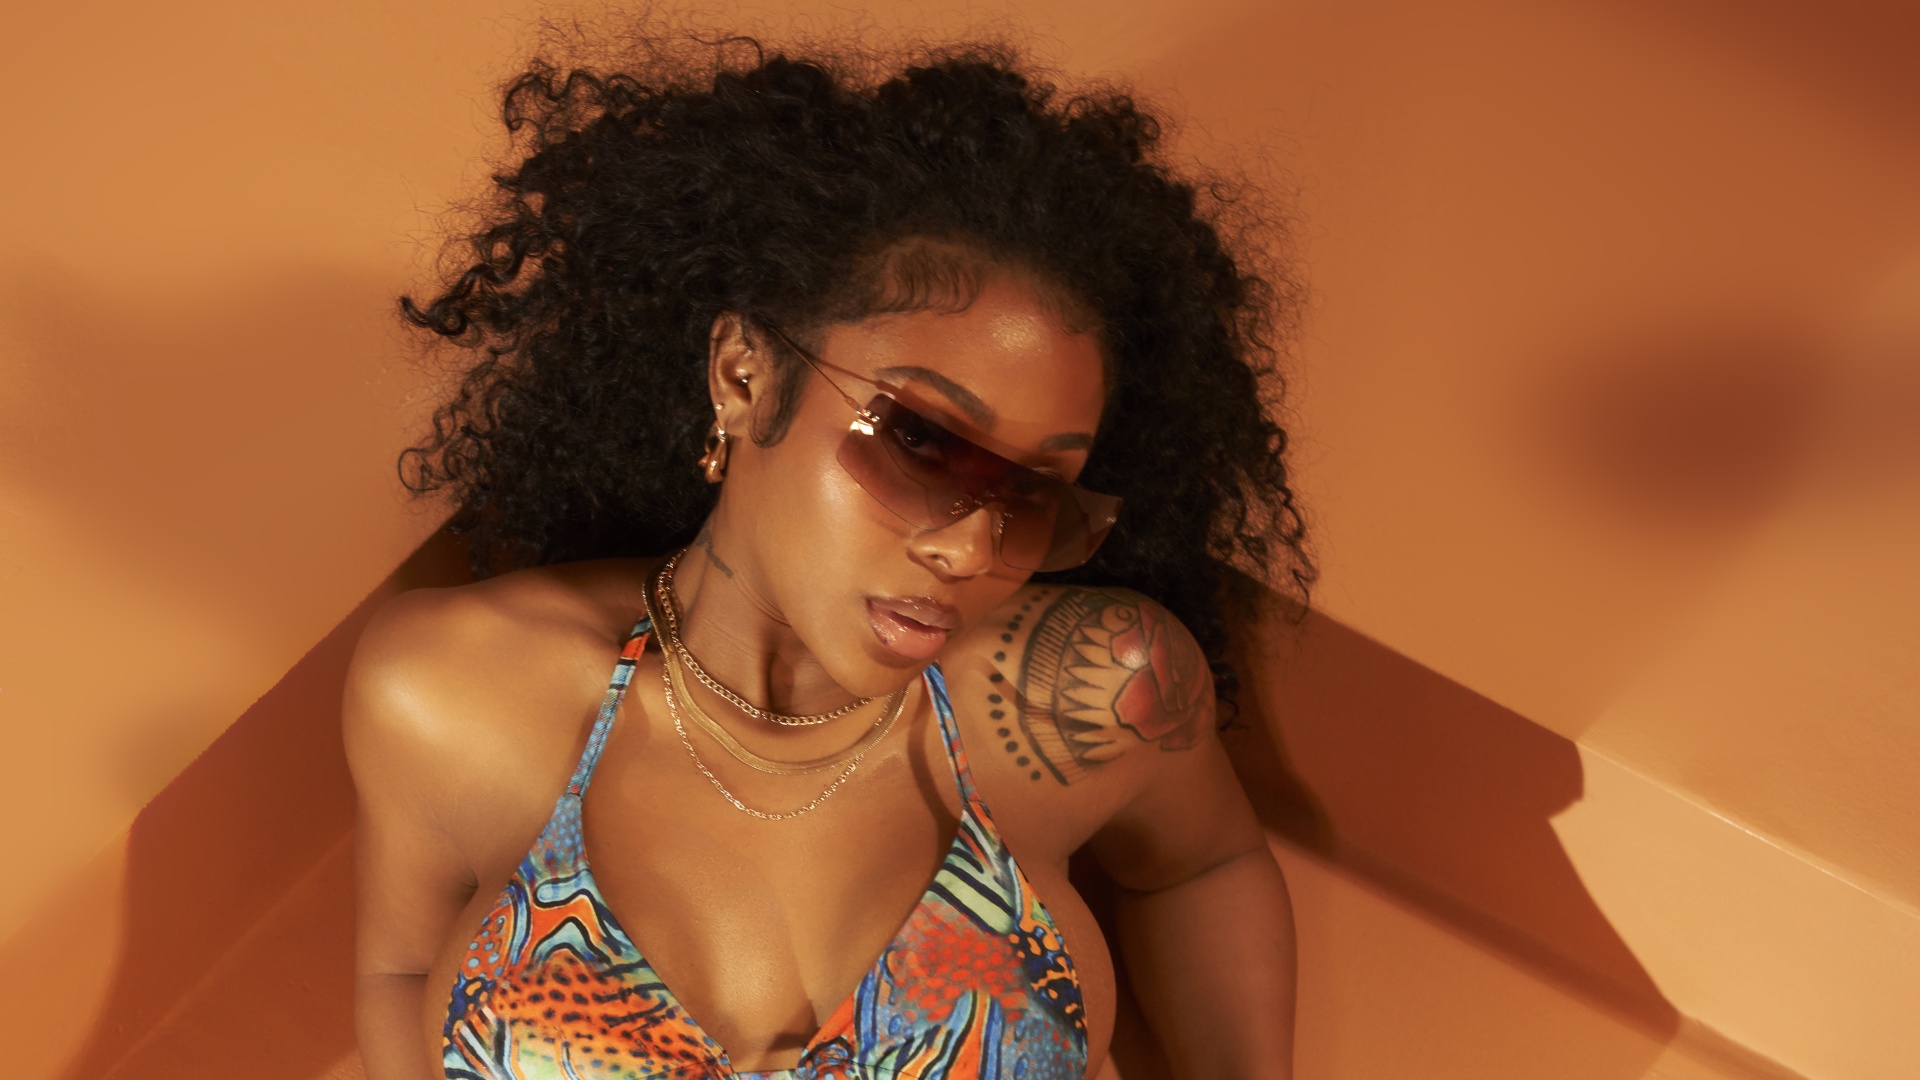 Jayda Wayda Launches New Swimwear Collection With PrettyLittleThing